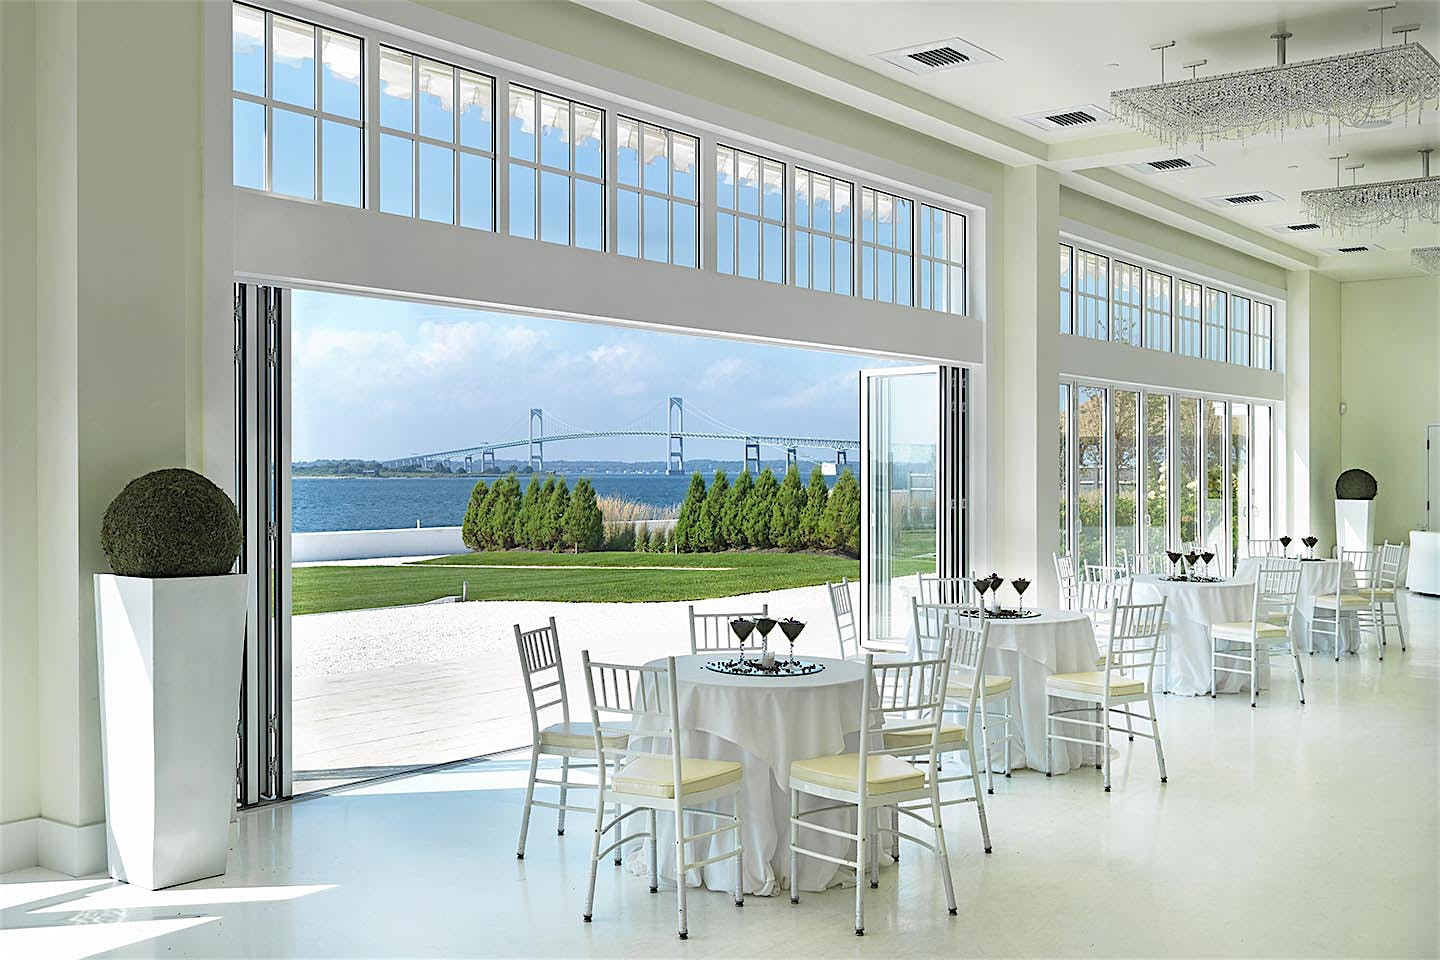 NanaWall opening glass walls in Country Club event space